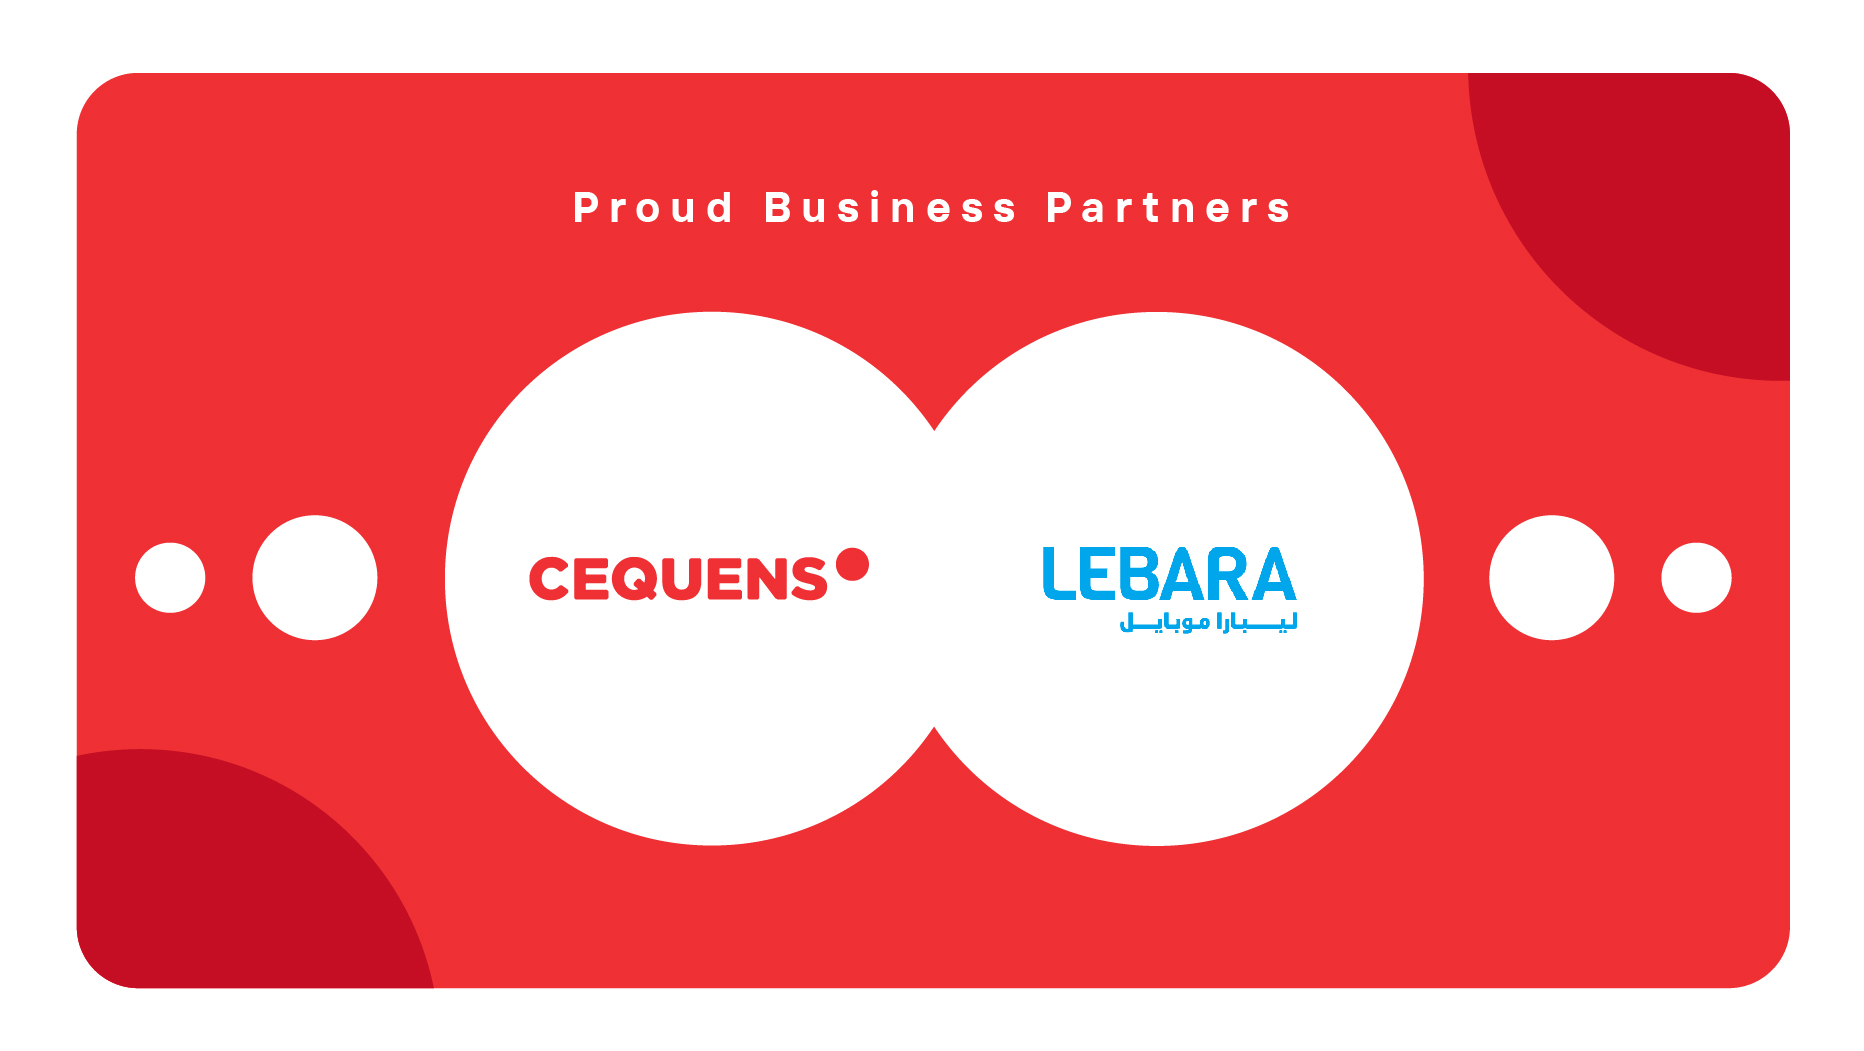 CEQUENS launches partnership for international A2P SMS monetization with Lebara KSA.